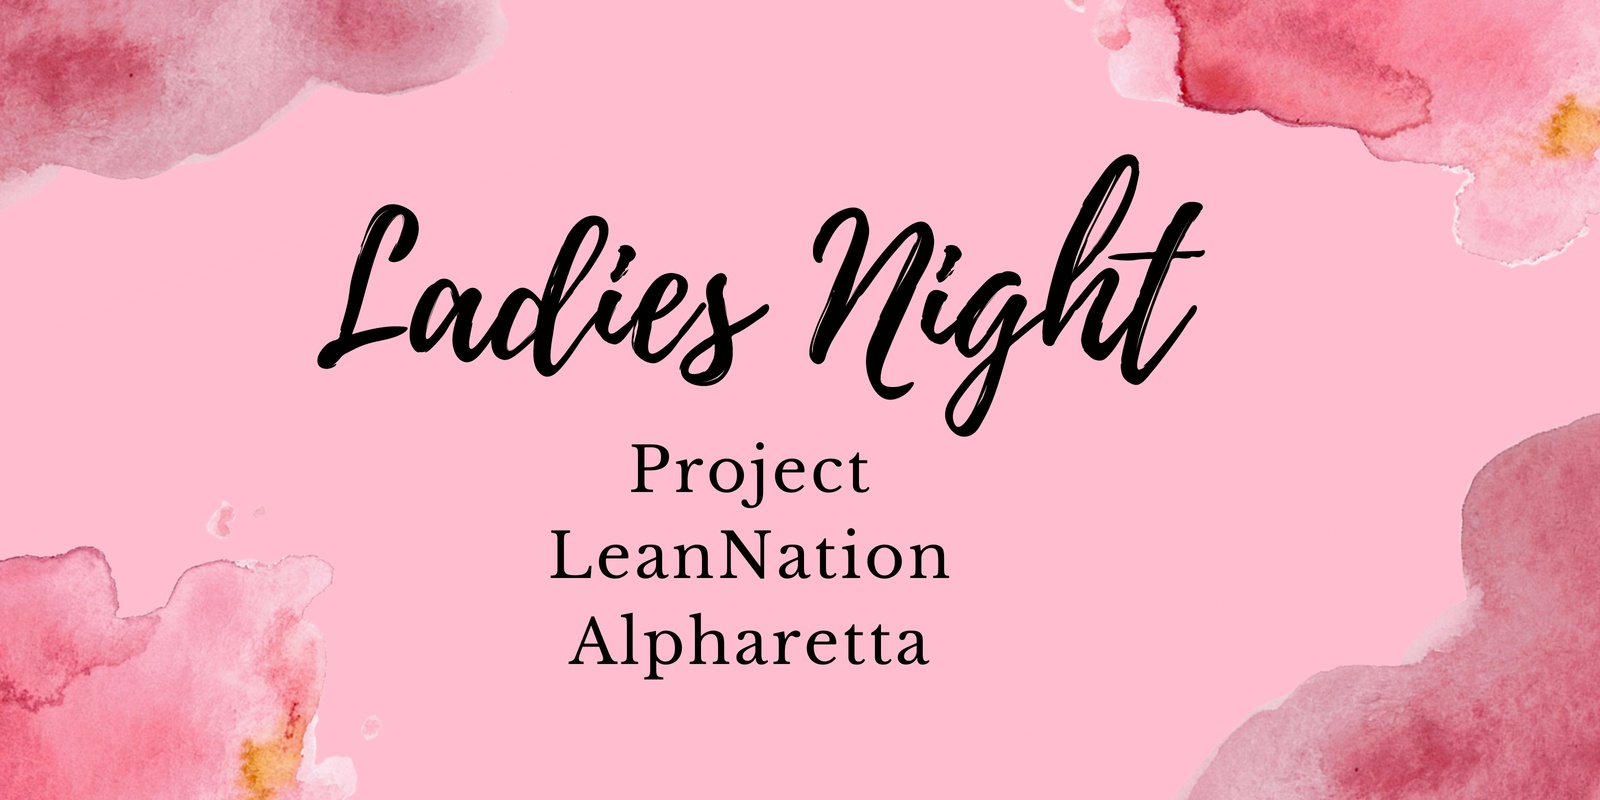 Banner image for Ladies Night